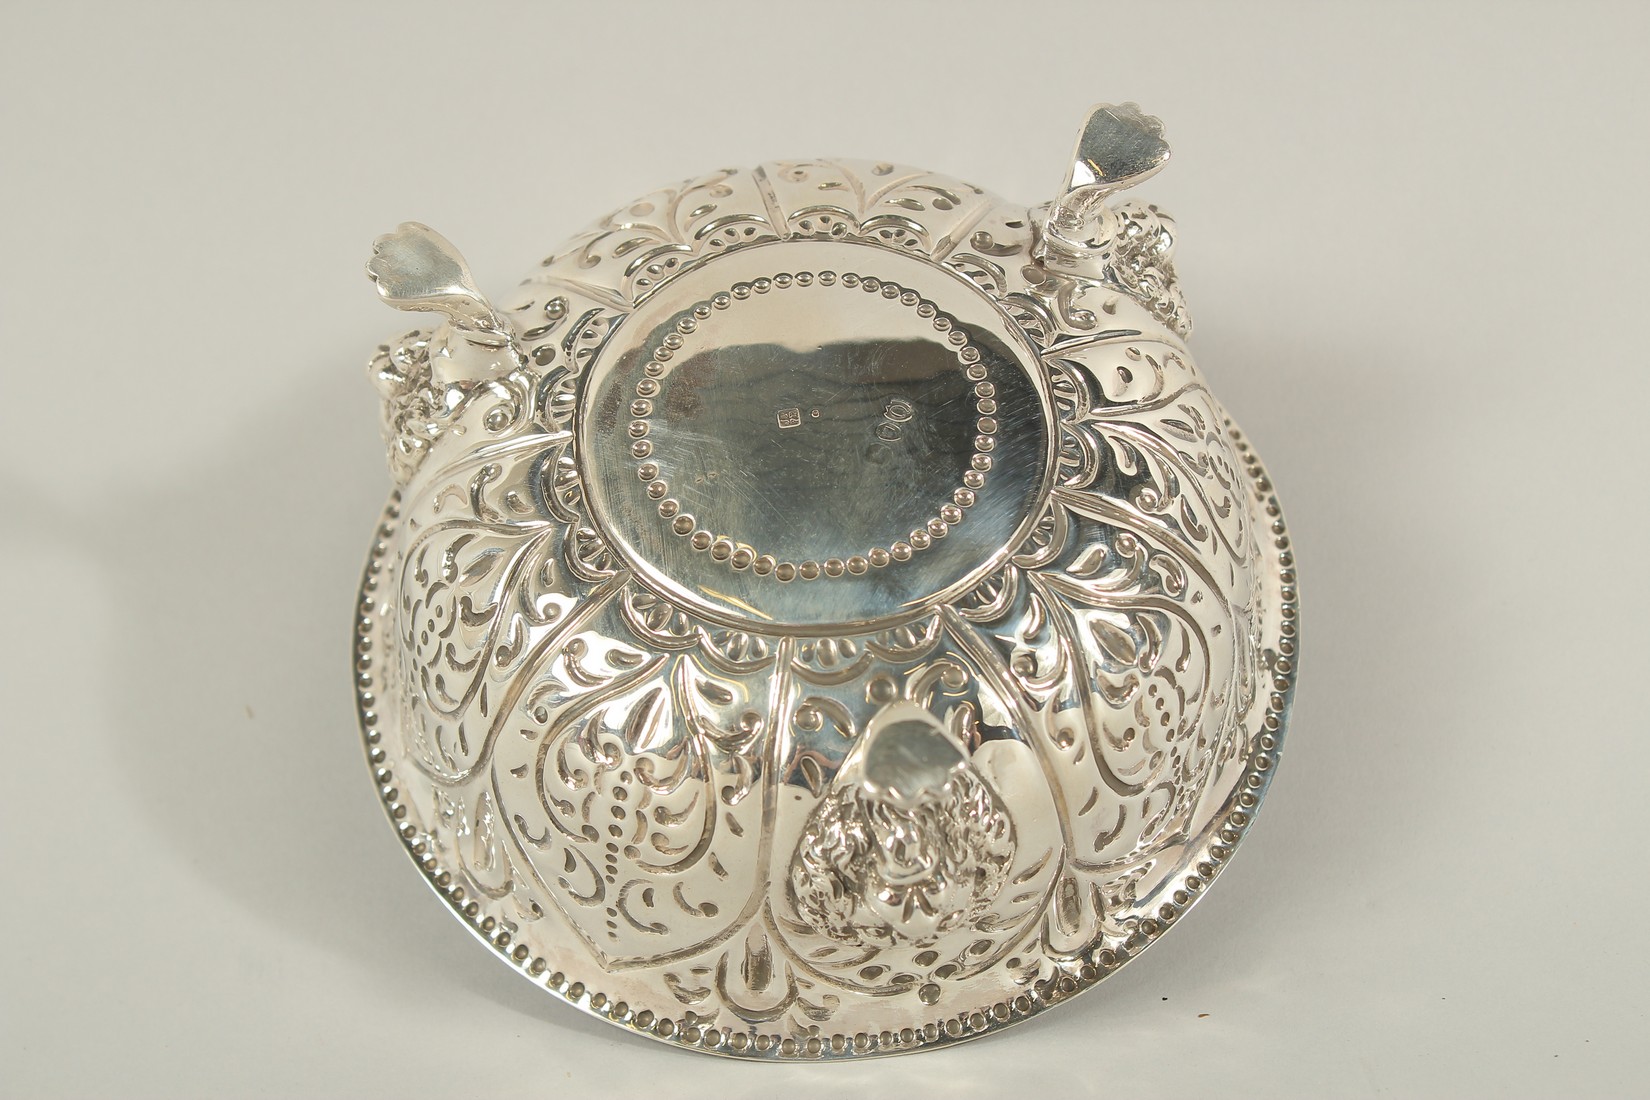 A VICTORIAN CIRCULAR SUGAR BOWL with repousse decoration. 5ins diameter. London 1891. - Image 4 of 4